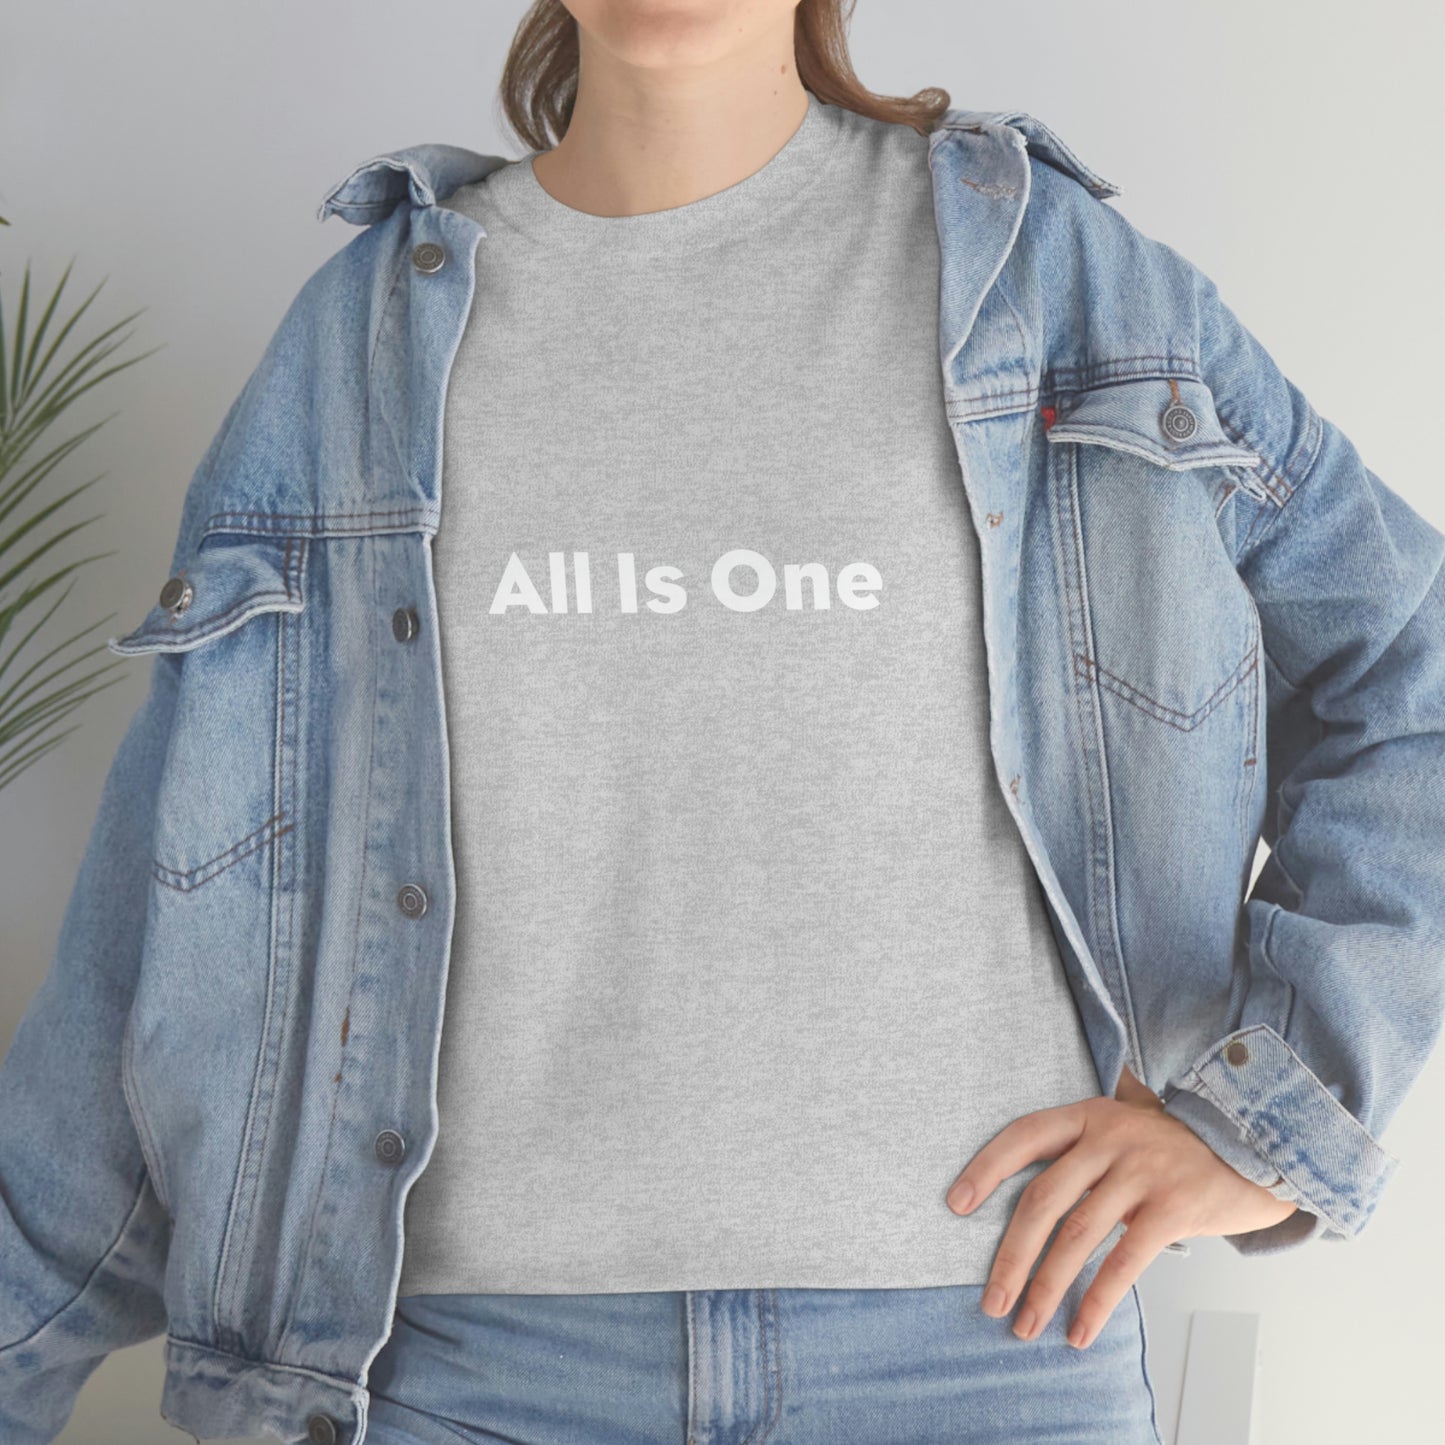 All Is One One Cotton T-Shirt Philosophical. Yoga. Mind Body Awareness T-Shirt